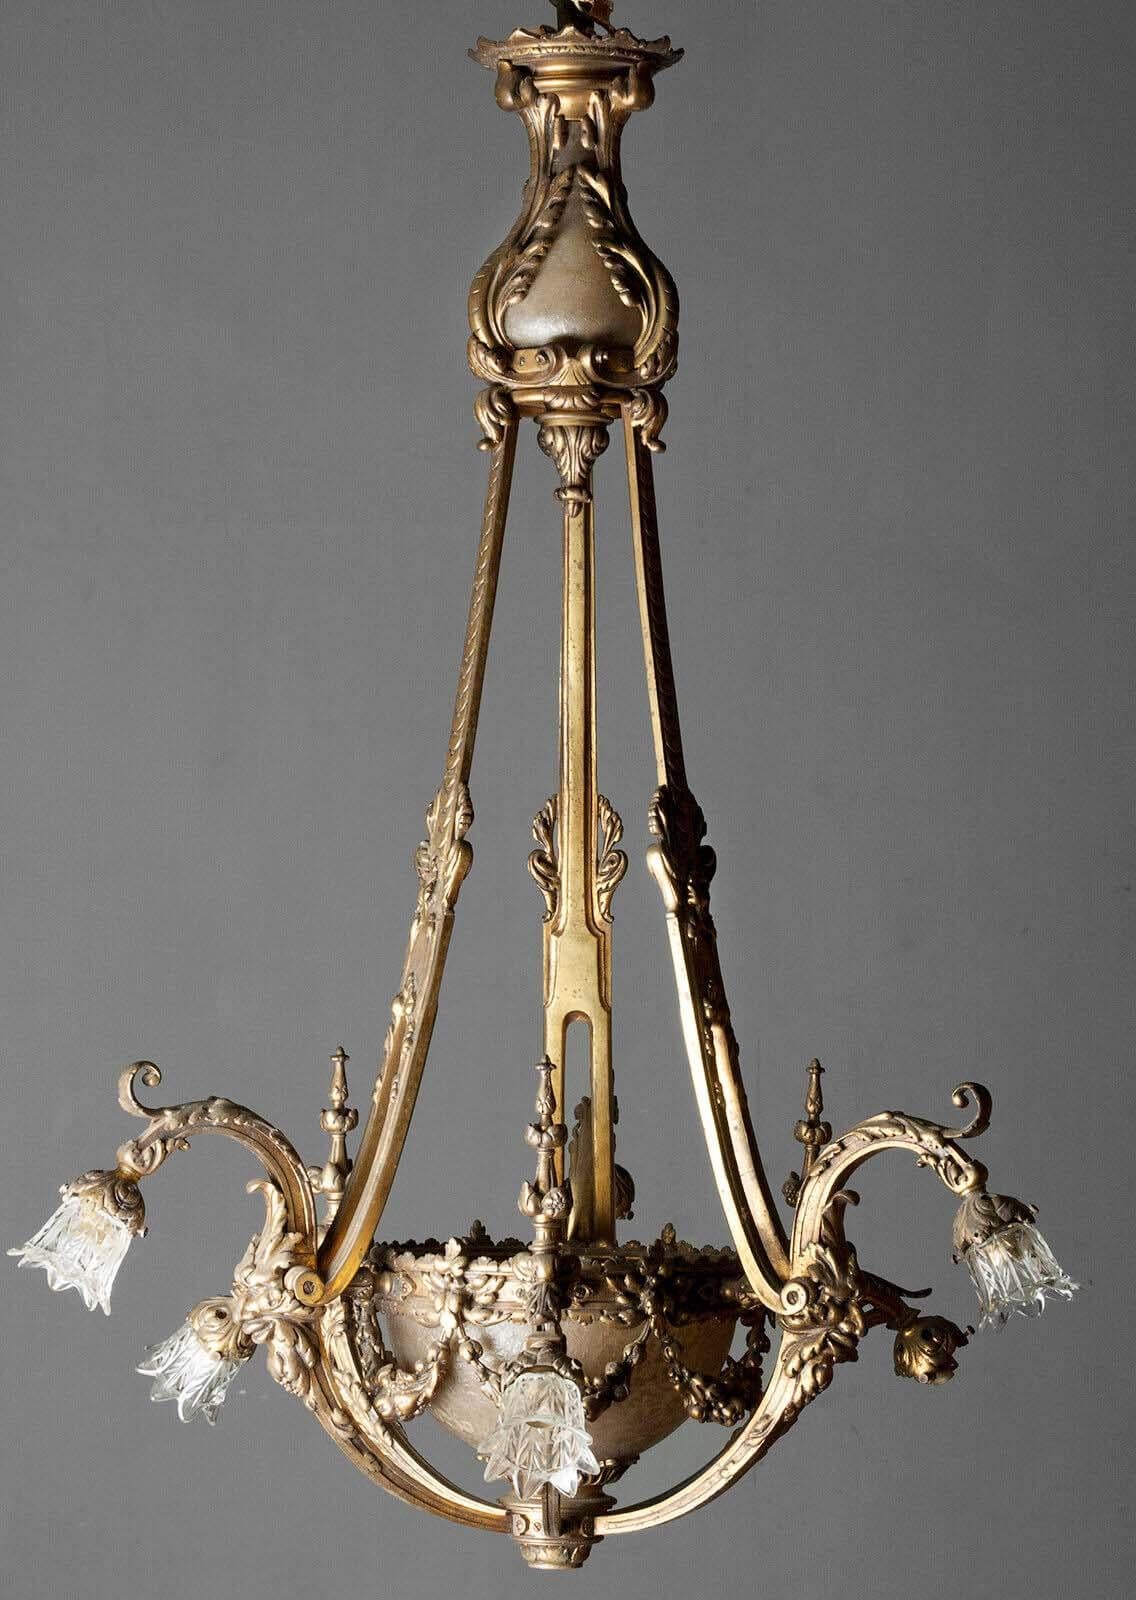 Beautiful antique bronze chandelier with 6 light points.
The glass bowl at the bottom is decorated with flowered flowers.
The glass caps on the arms are not original, but they fit well with the lamp.
The lamp is of heavy quality, probably made